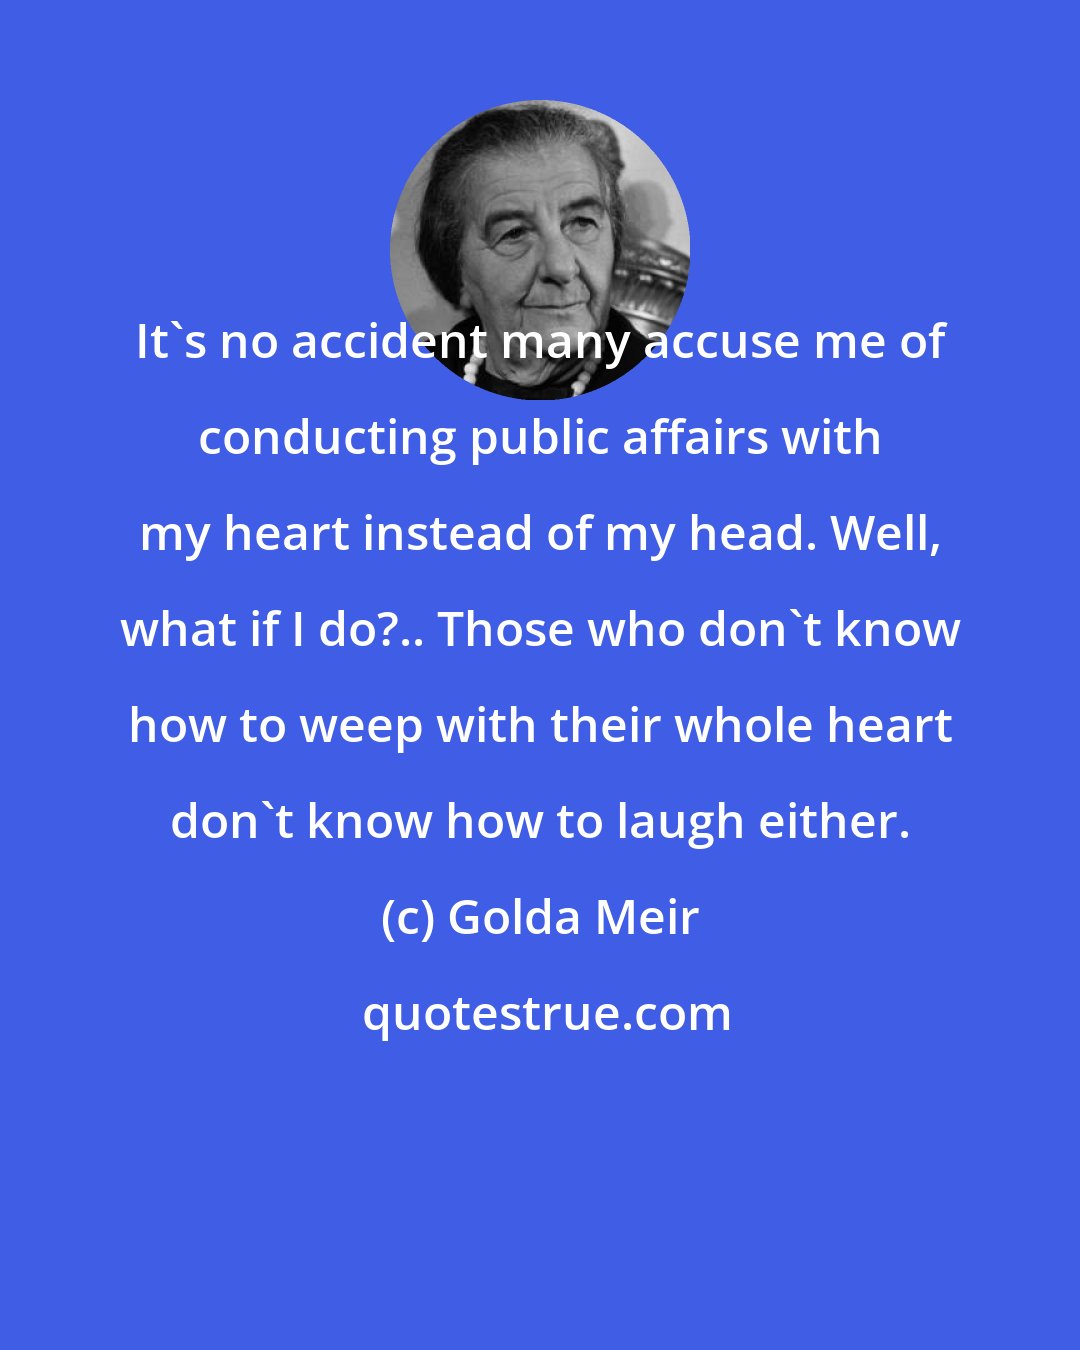 Golda Meir: It's no accident many accuse me of conducting public affairs with my heart instead of my head. Well, what if I do?.. Those who don't know how to weep with their whole heart don't know how to laugh either.